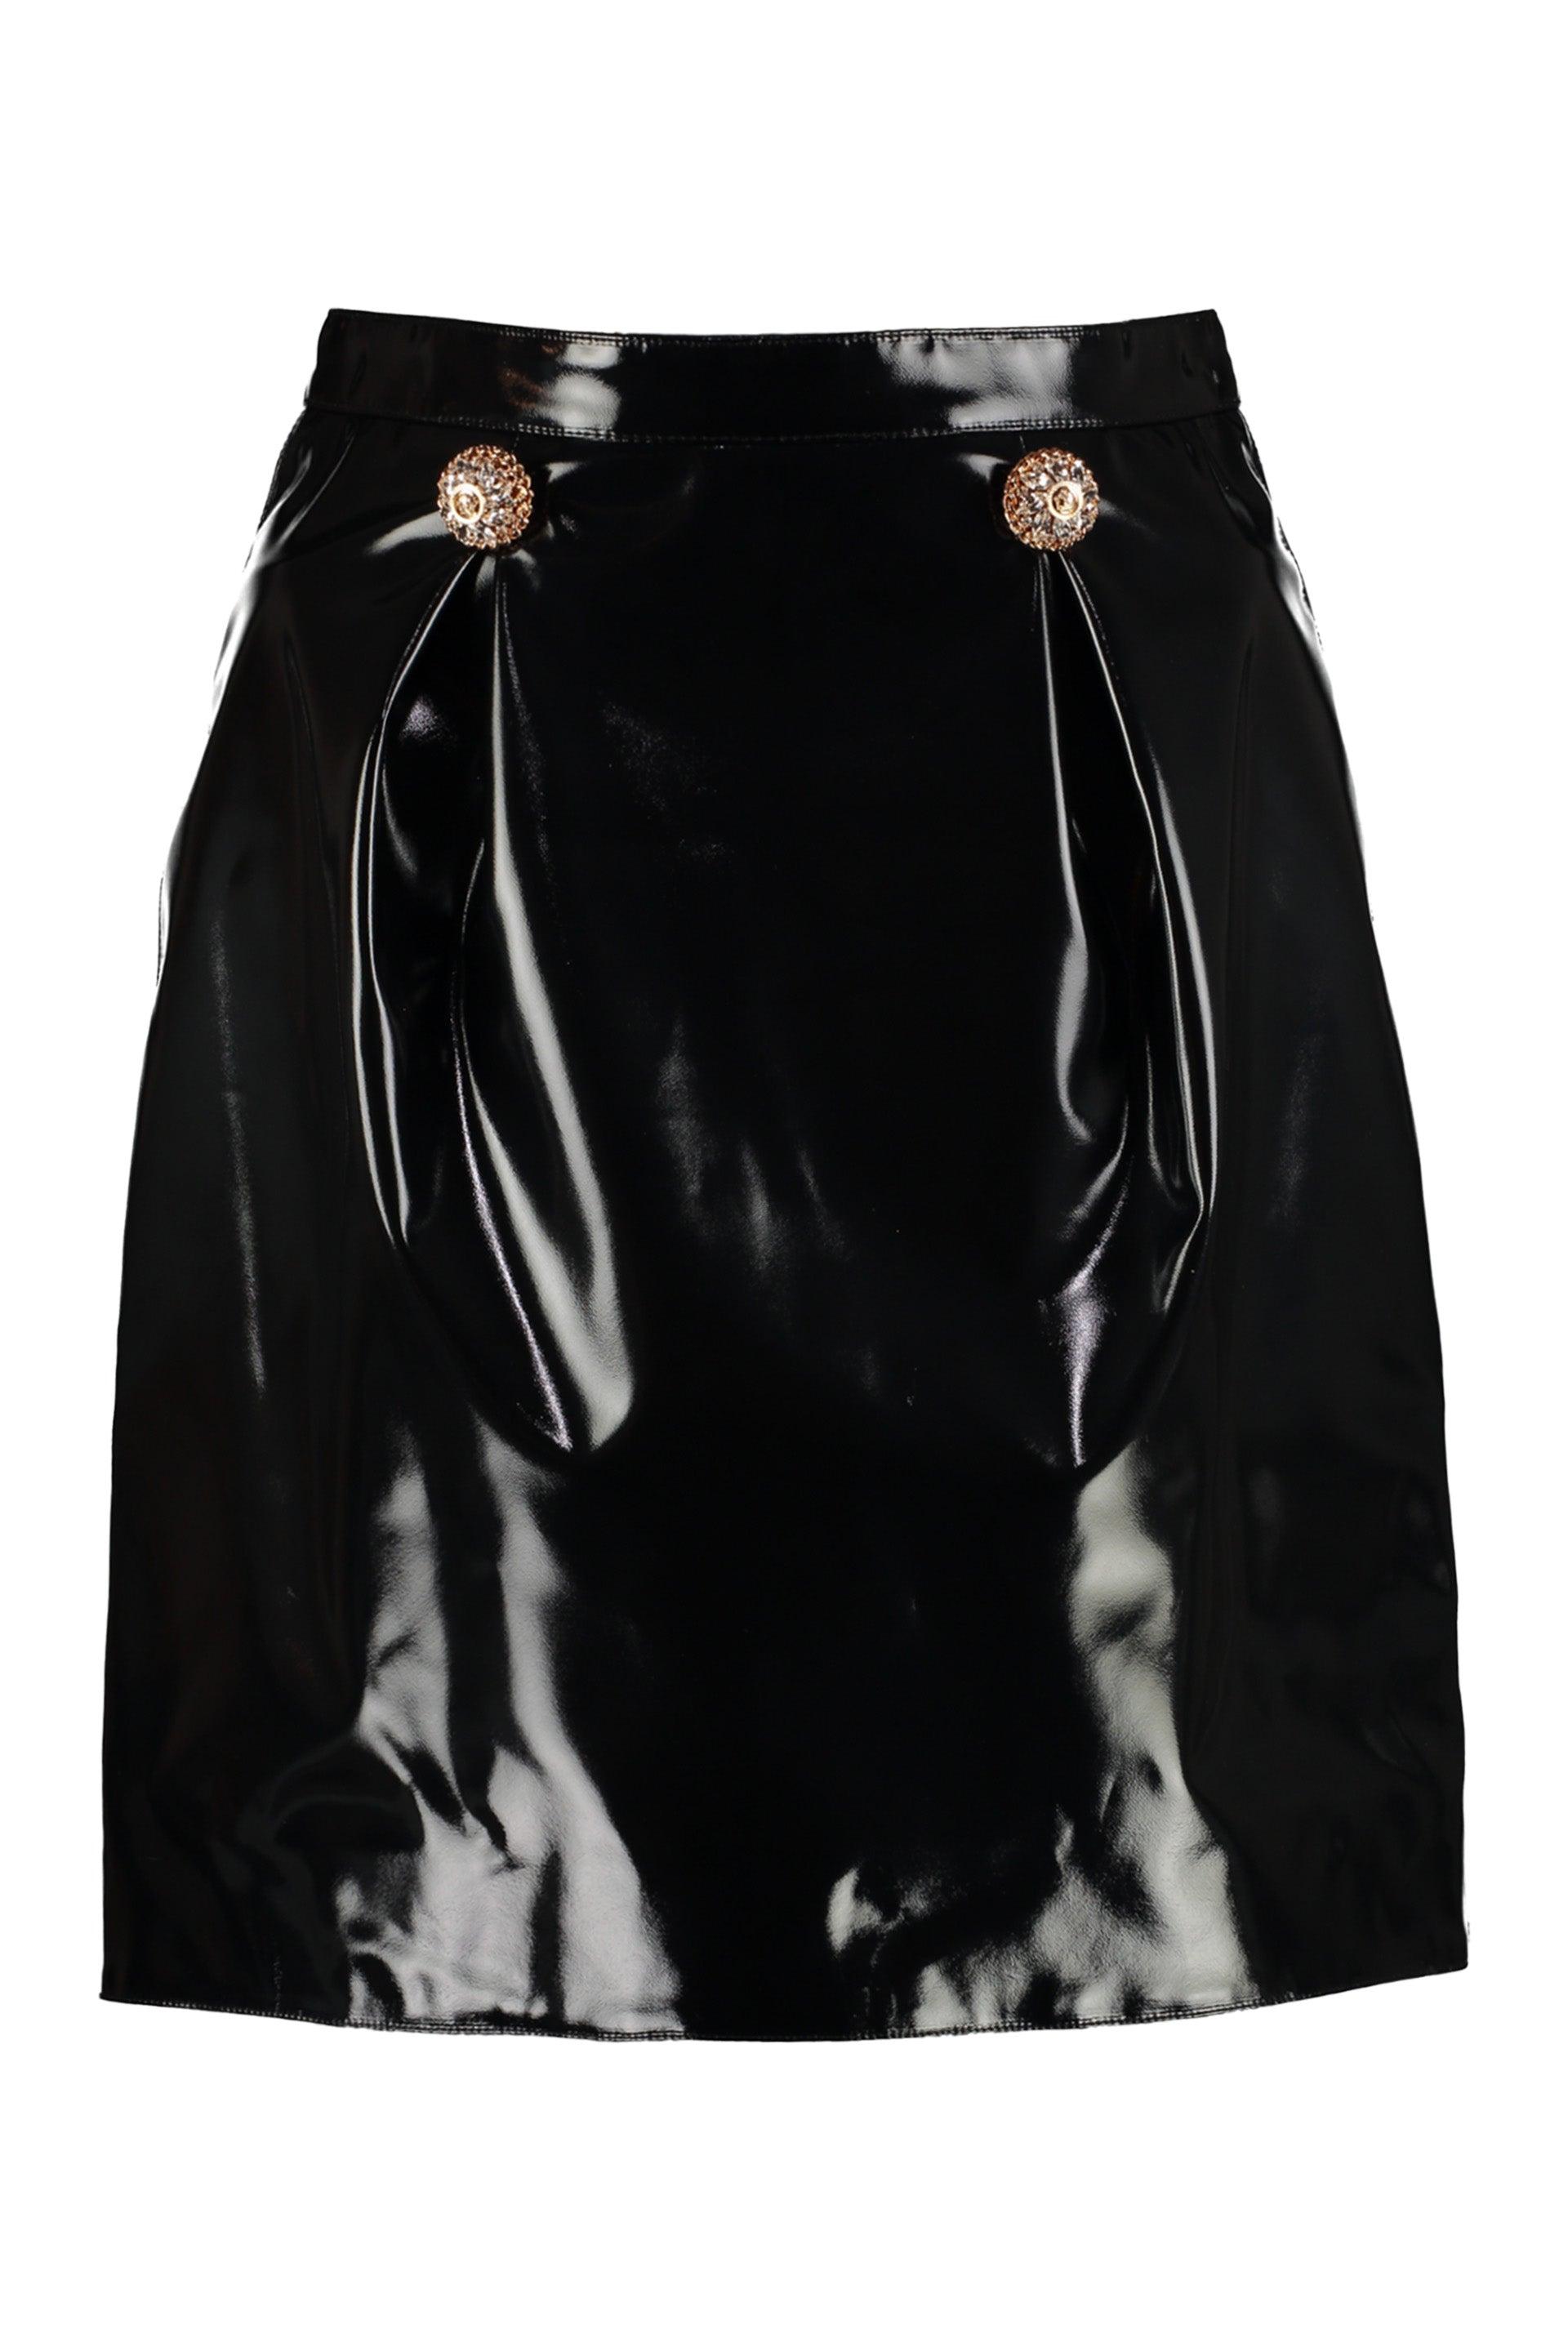 Versace Faux Leather Mini Skirt in Black | Lyst